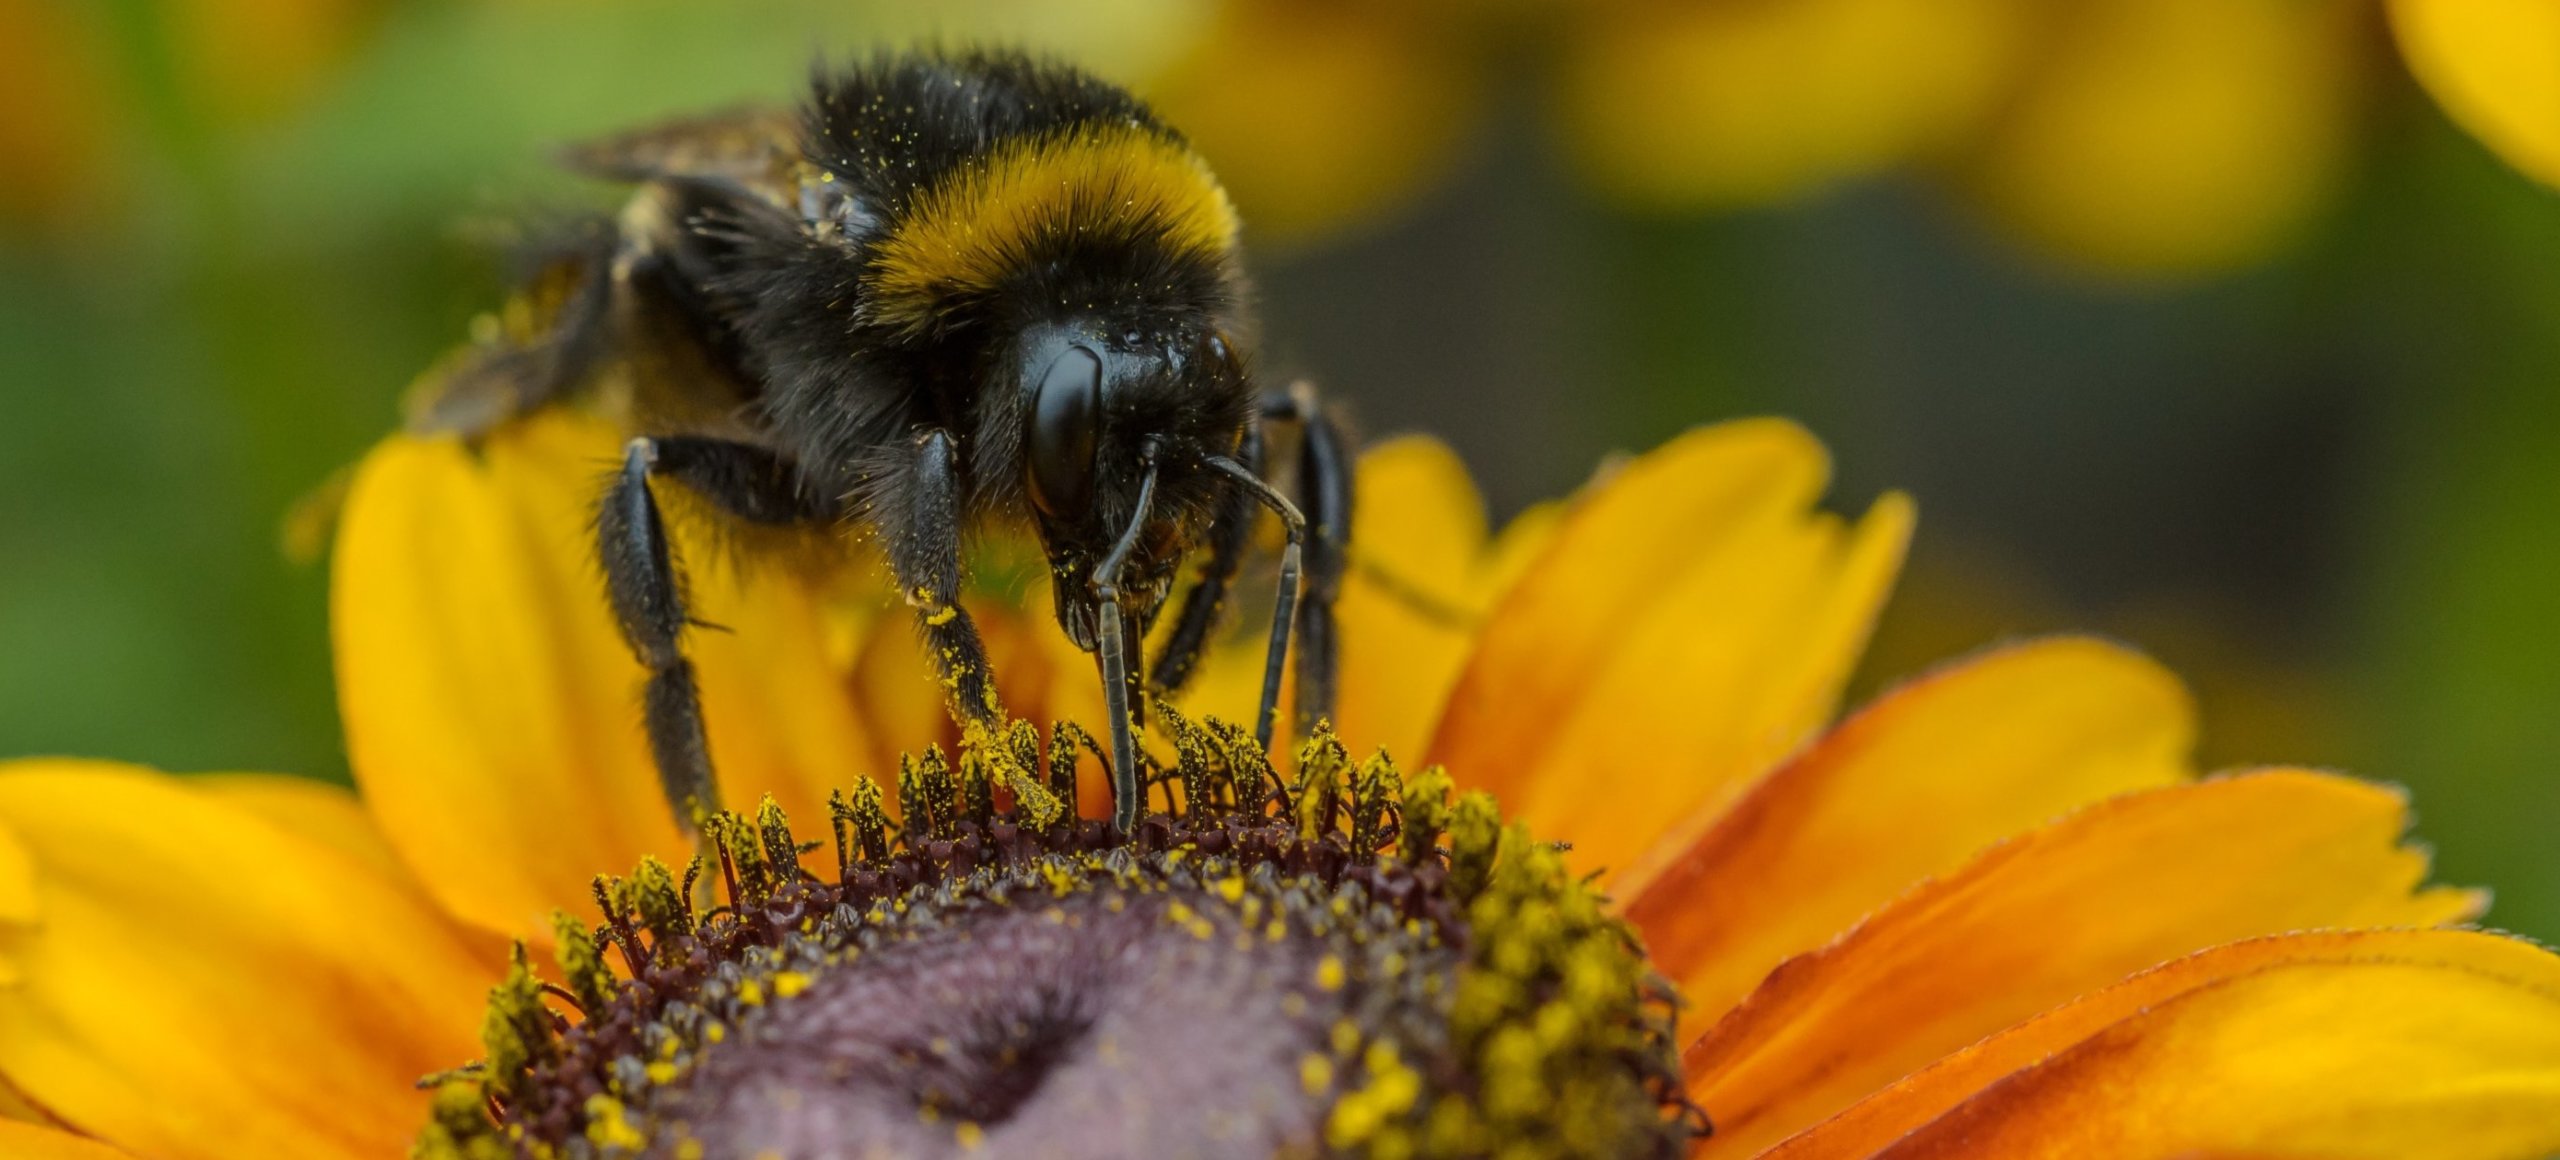 Close up of a bee on a yellow flower.